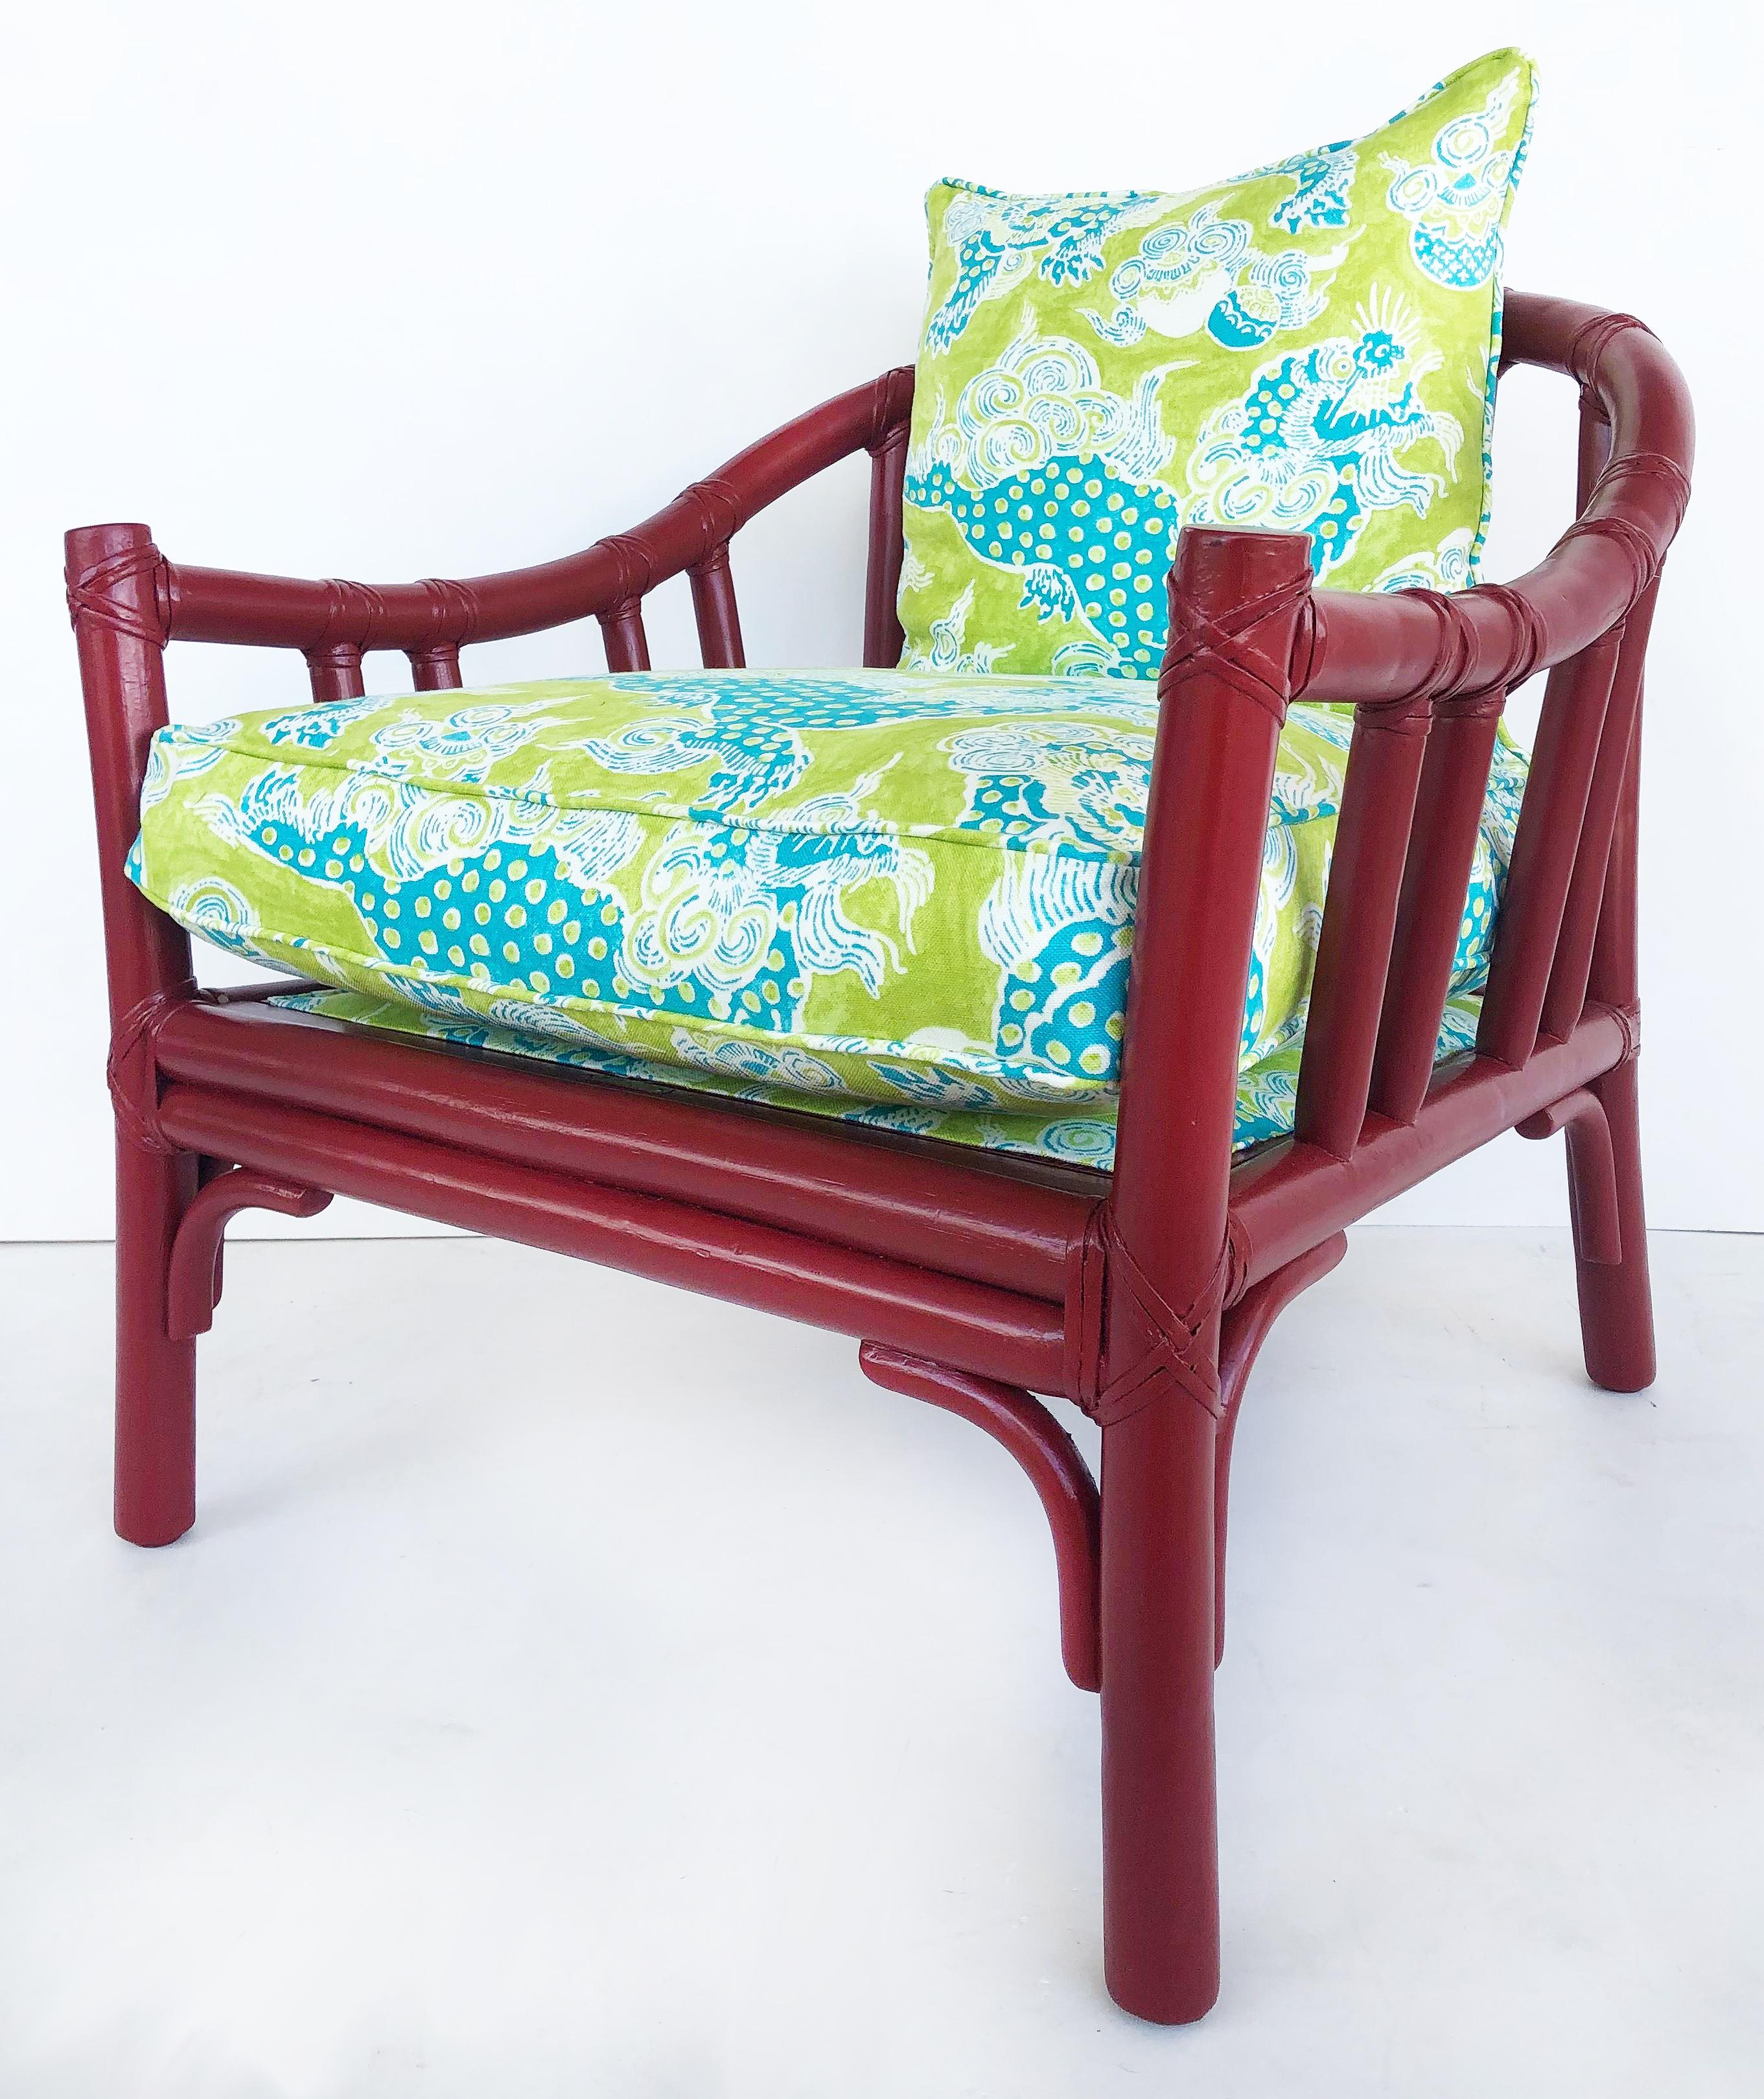 McGuire San Francisco Rattan club chairs, Brunschwig & Fils fabric

Offered for sale is a pair of McGuire of San Francisco, CA rattan with leather wrapping club chairs with loose seat and back cushions. The rattan frames have been painted and the